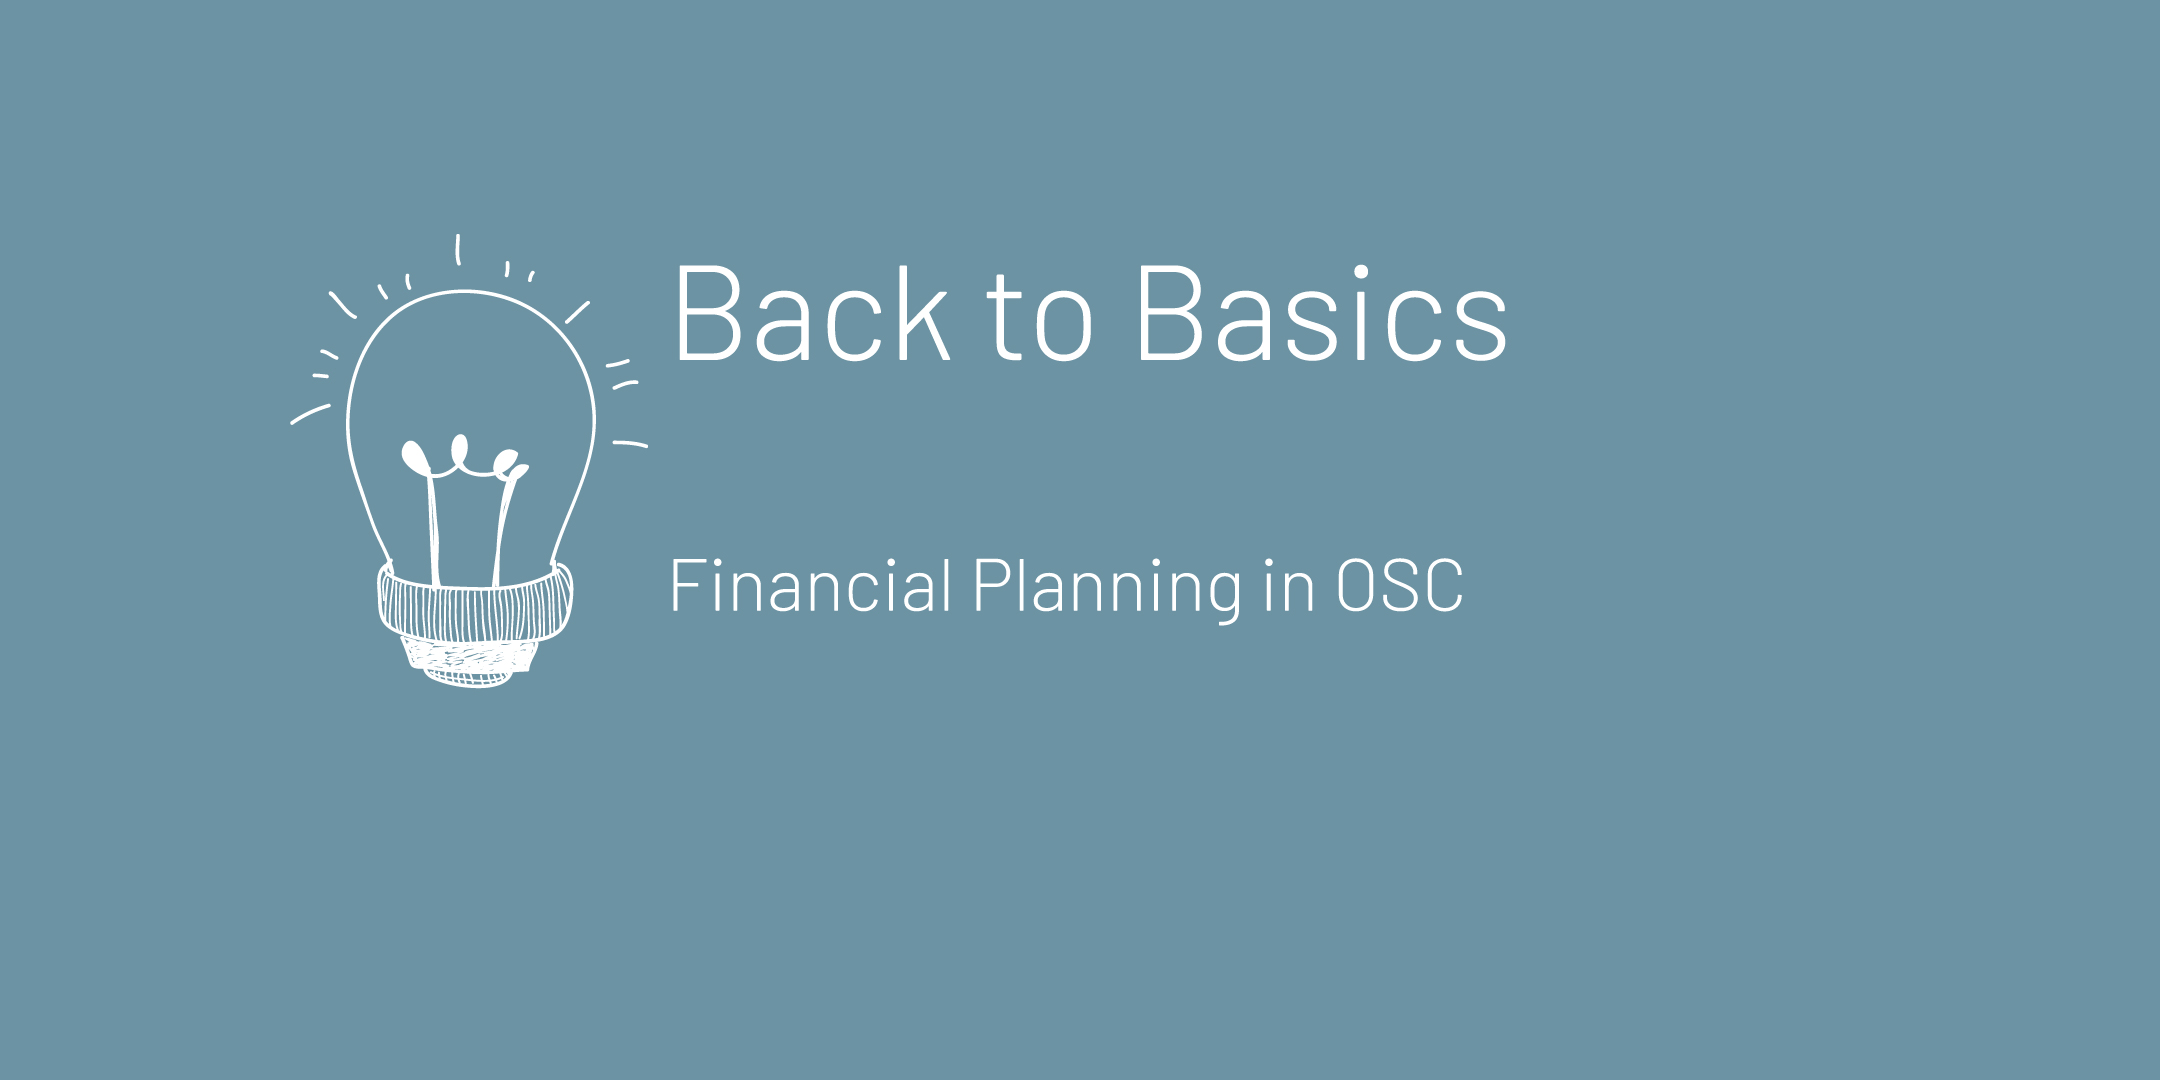 image for back to basics financial planning main image